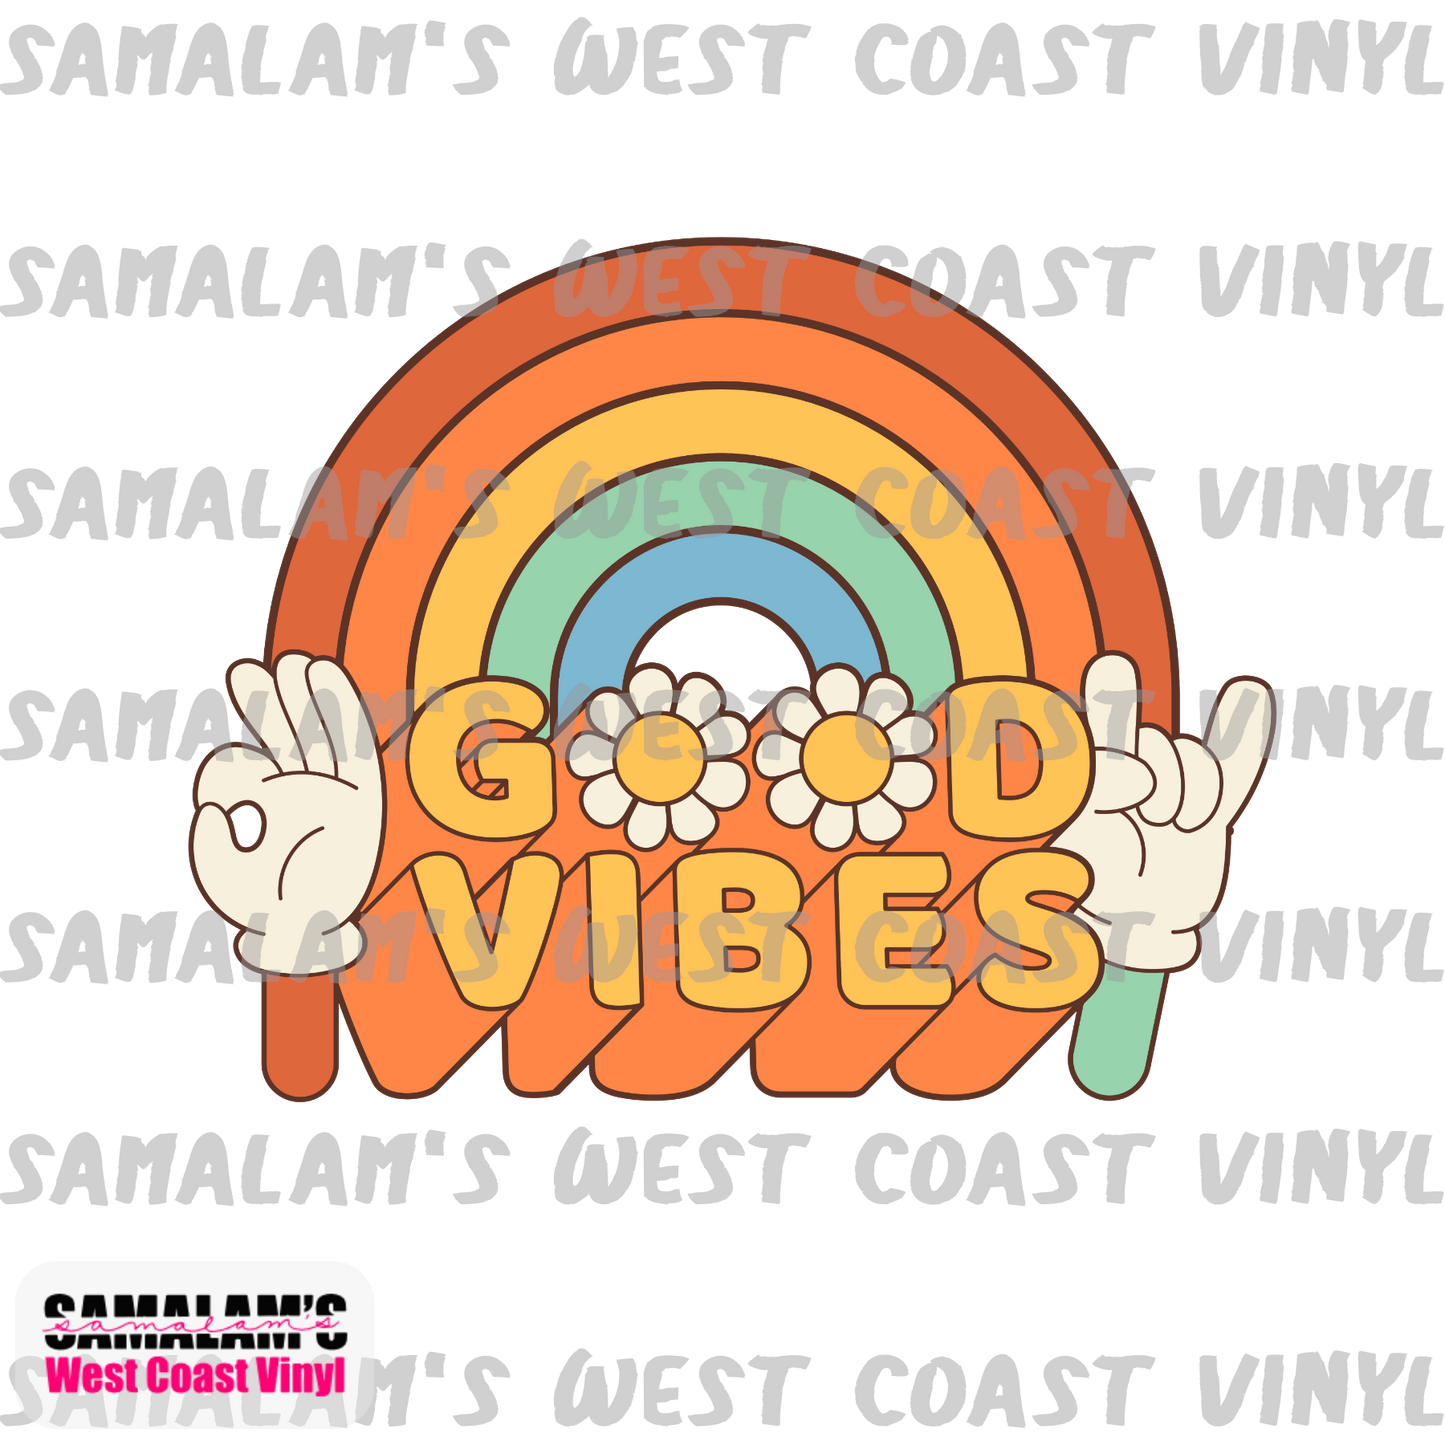 Good Vibes - Clear Cast Decal